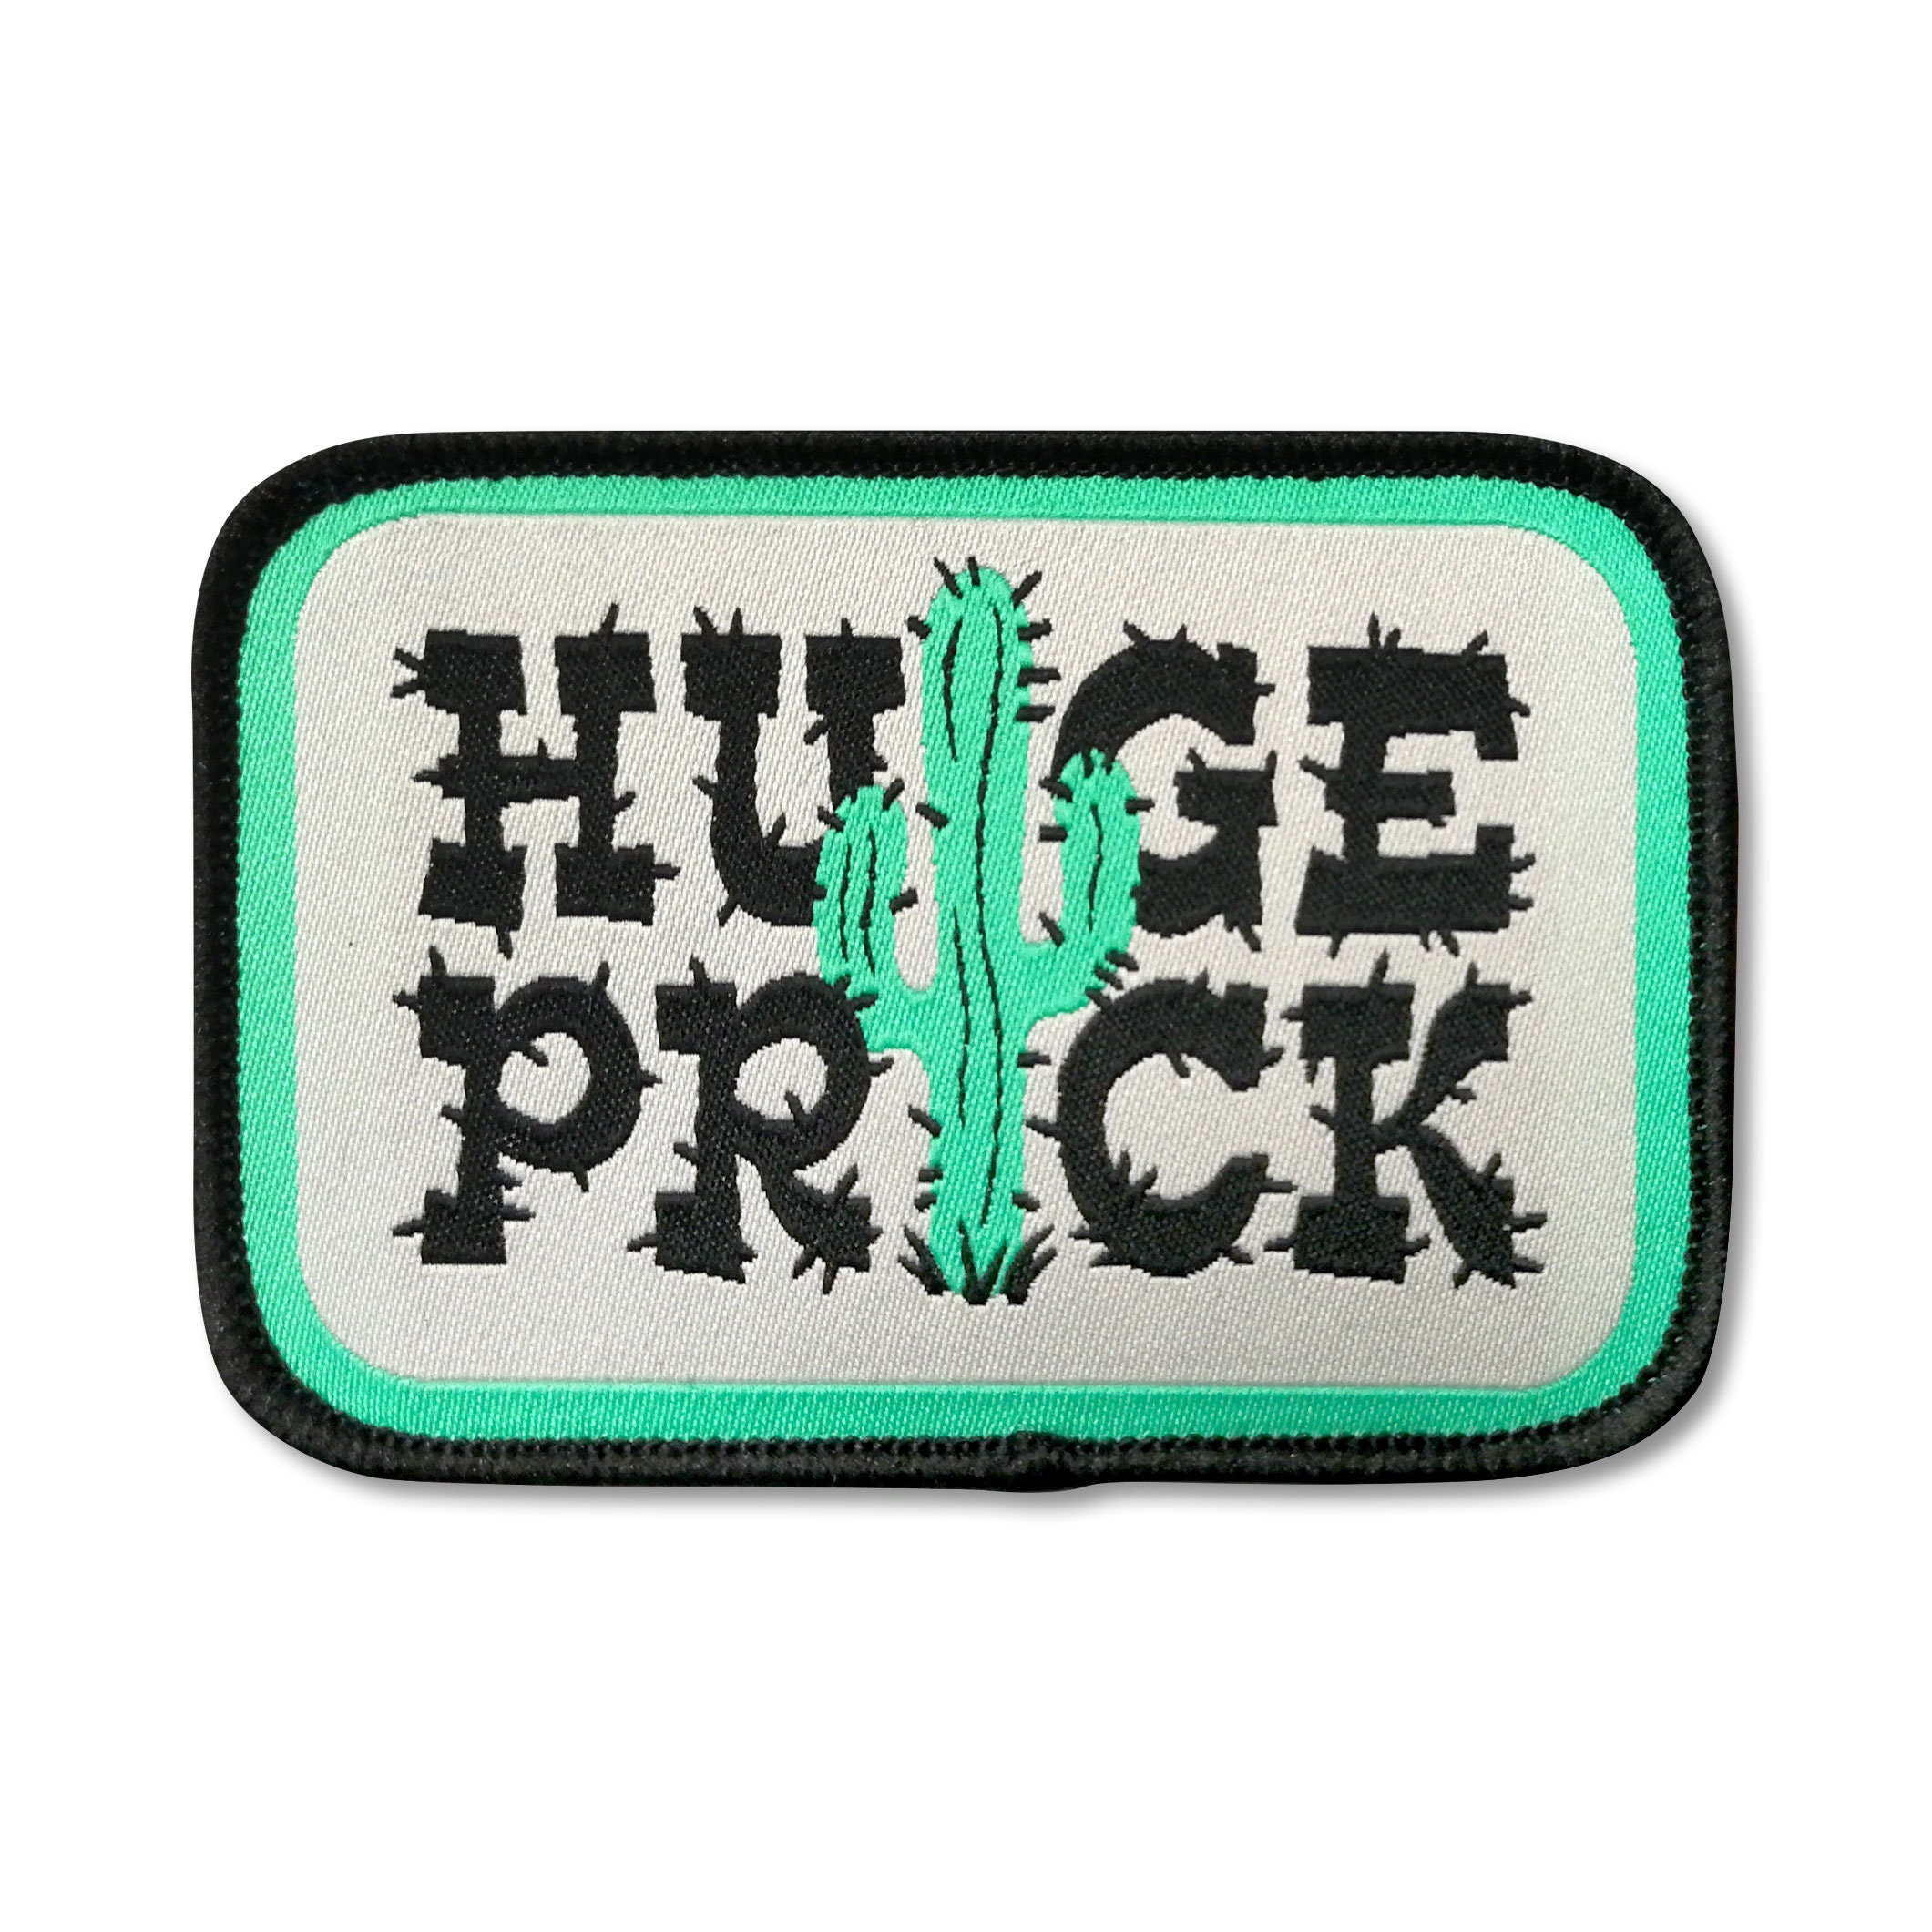 Most Likely to Sunburn funny Iron On Patch | Woven Glue Backed Camping  Patches | Backpack Patches | Cool Funny Camp Patches for Jackets